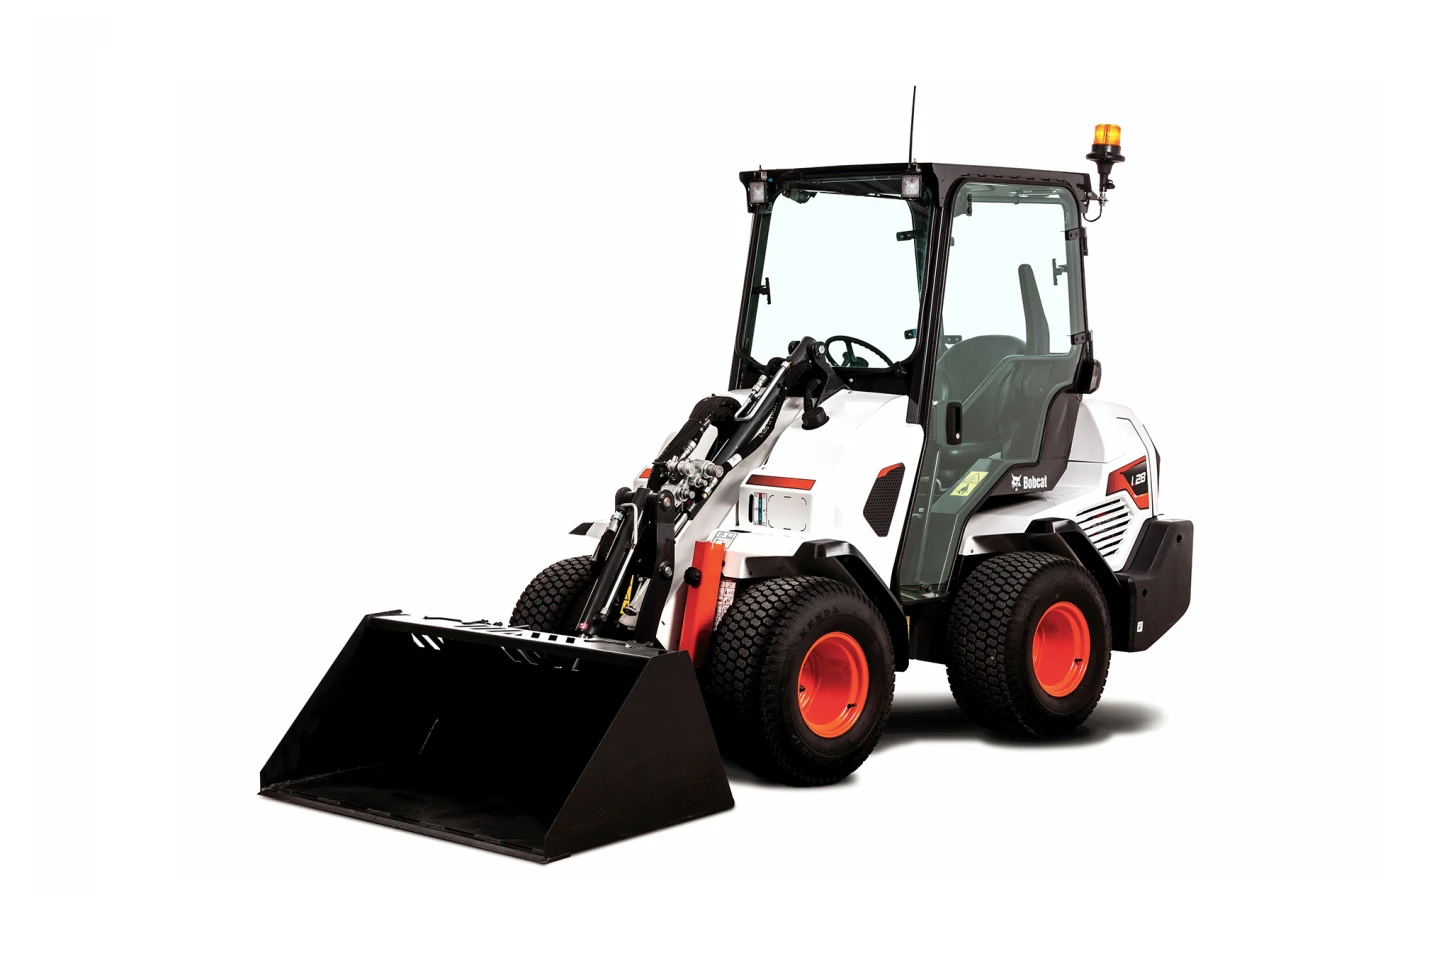 Browse Specs and more for the Bobcat L28 Small Articulated Loader - Bobcat of Indy